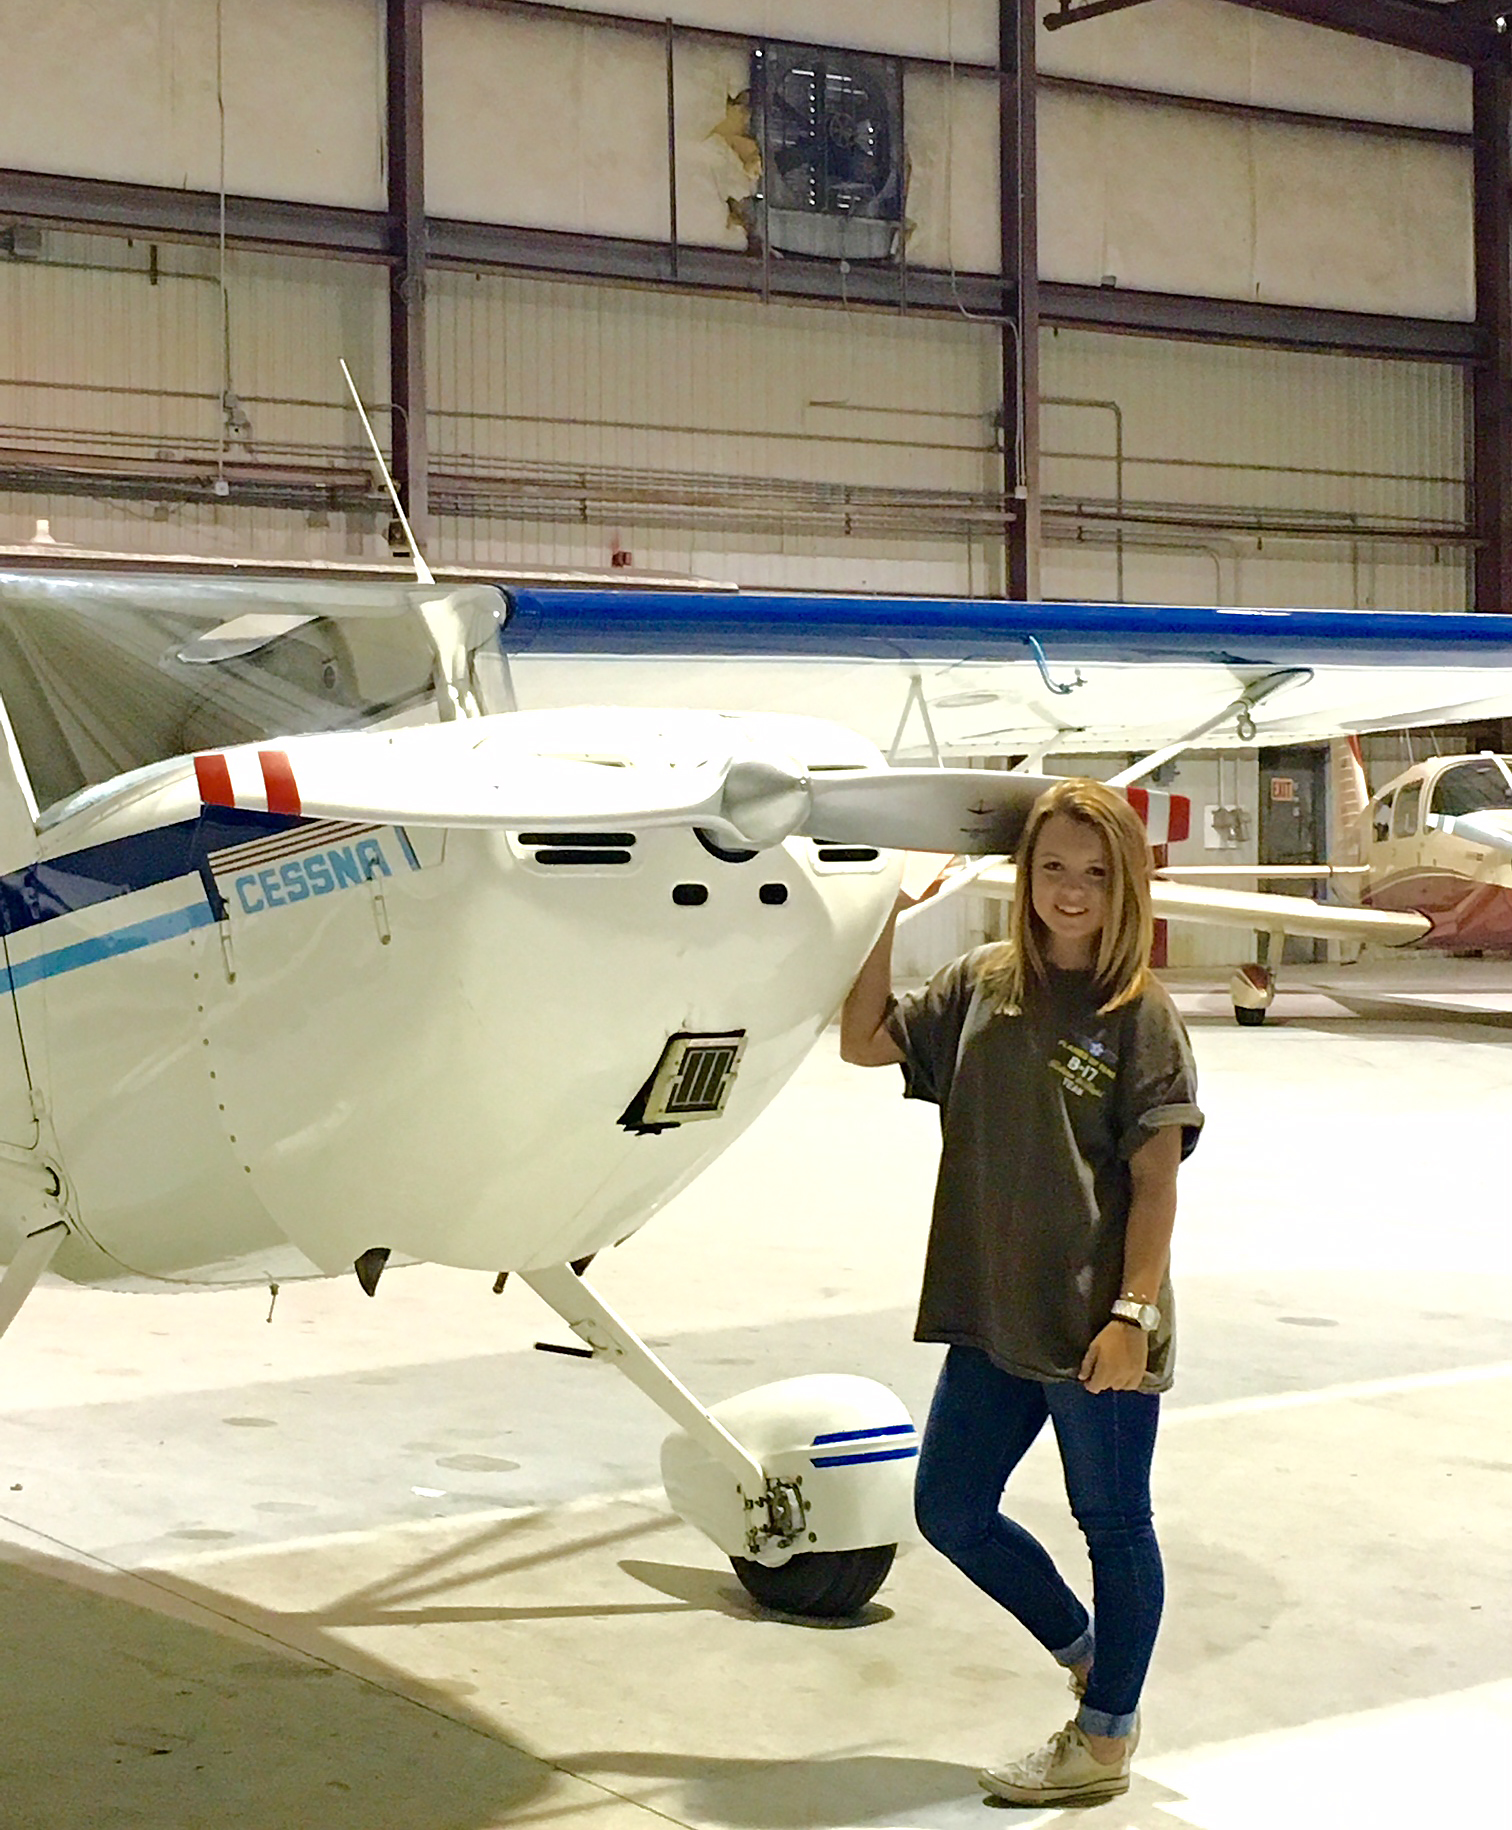 Sierra Lund, who hopes to complete an online degree with Embry-Riddle Aeronautical University, poses for a photo near the Cessna 140 her dad bought her for high school graduation. Photo courtesy of Kevin Lund.                                                                                                                                    